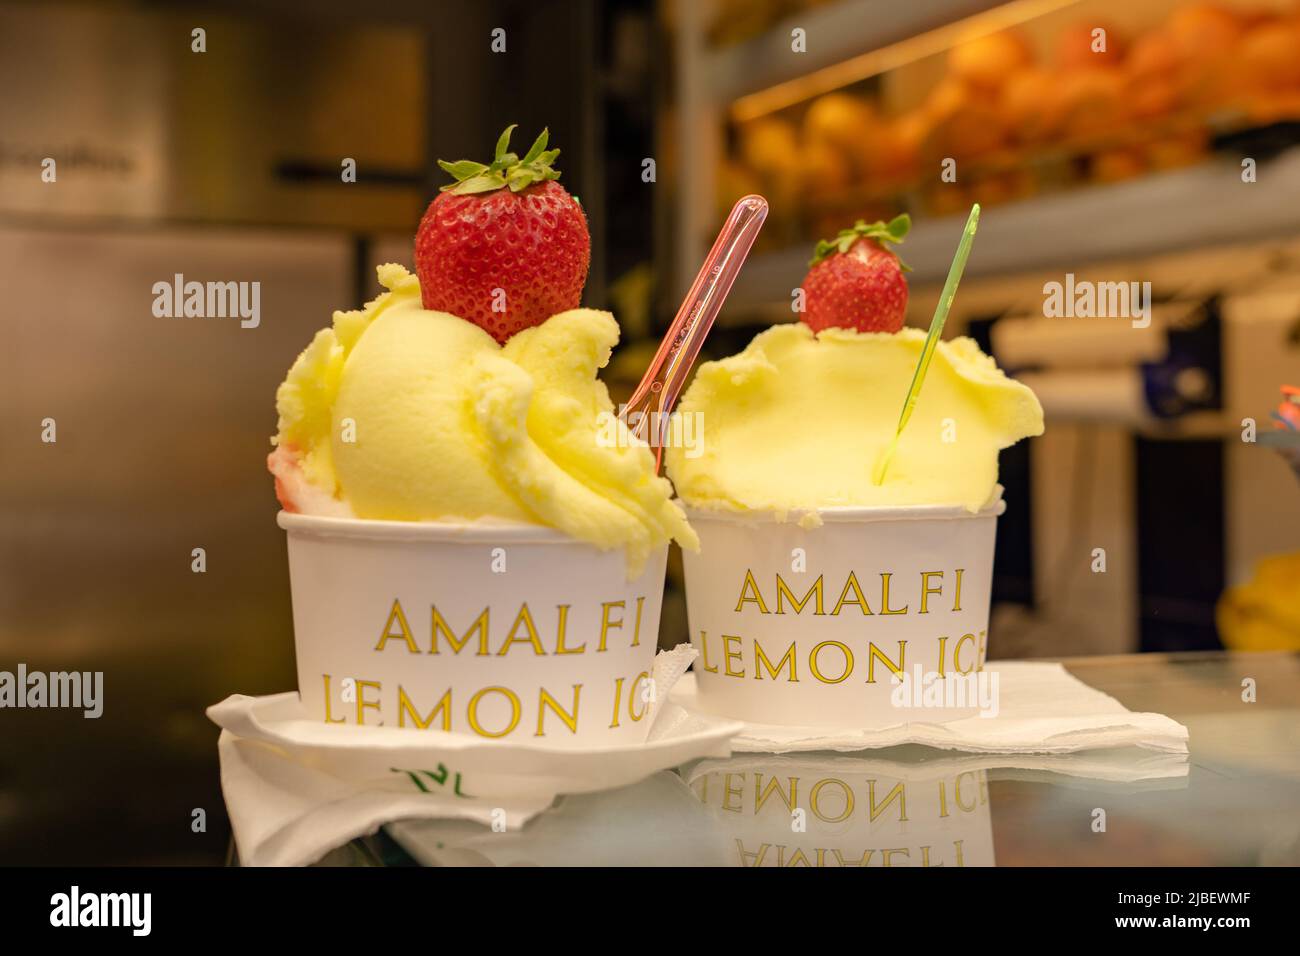 Lemon ice with strawberry is a  specialty with the best lemons from the  region in Amalfi, Italy Stock Photo